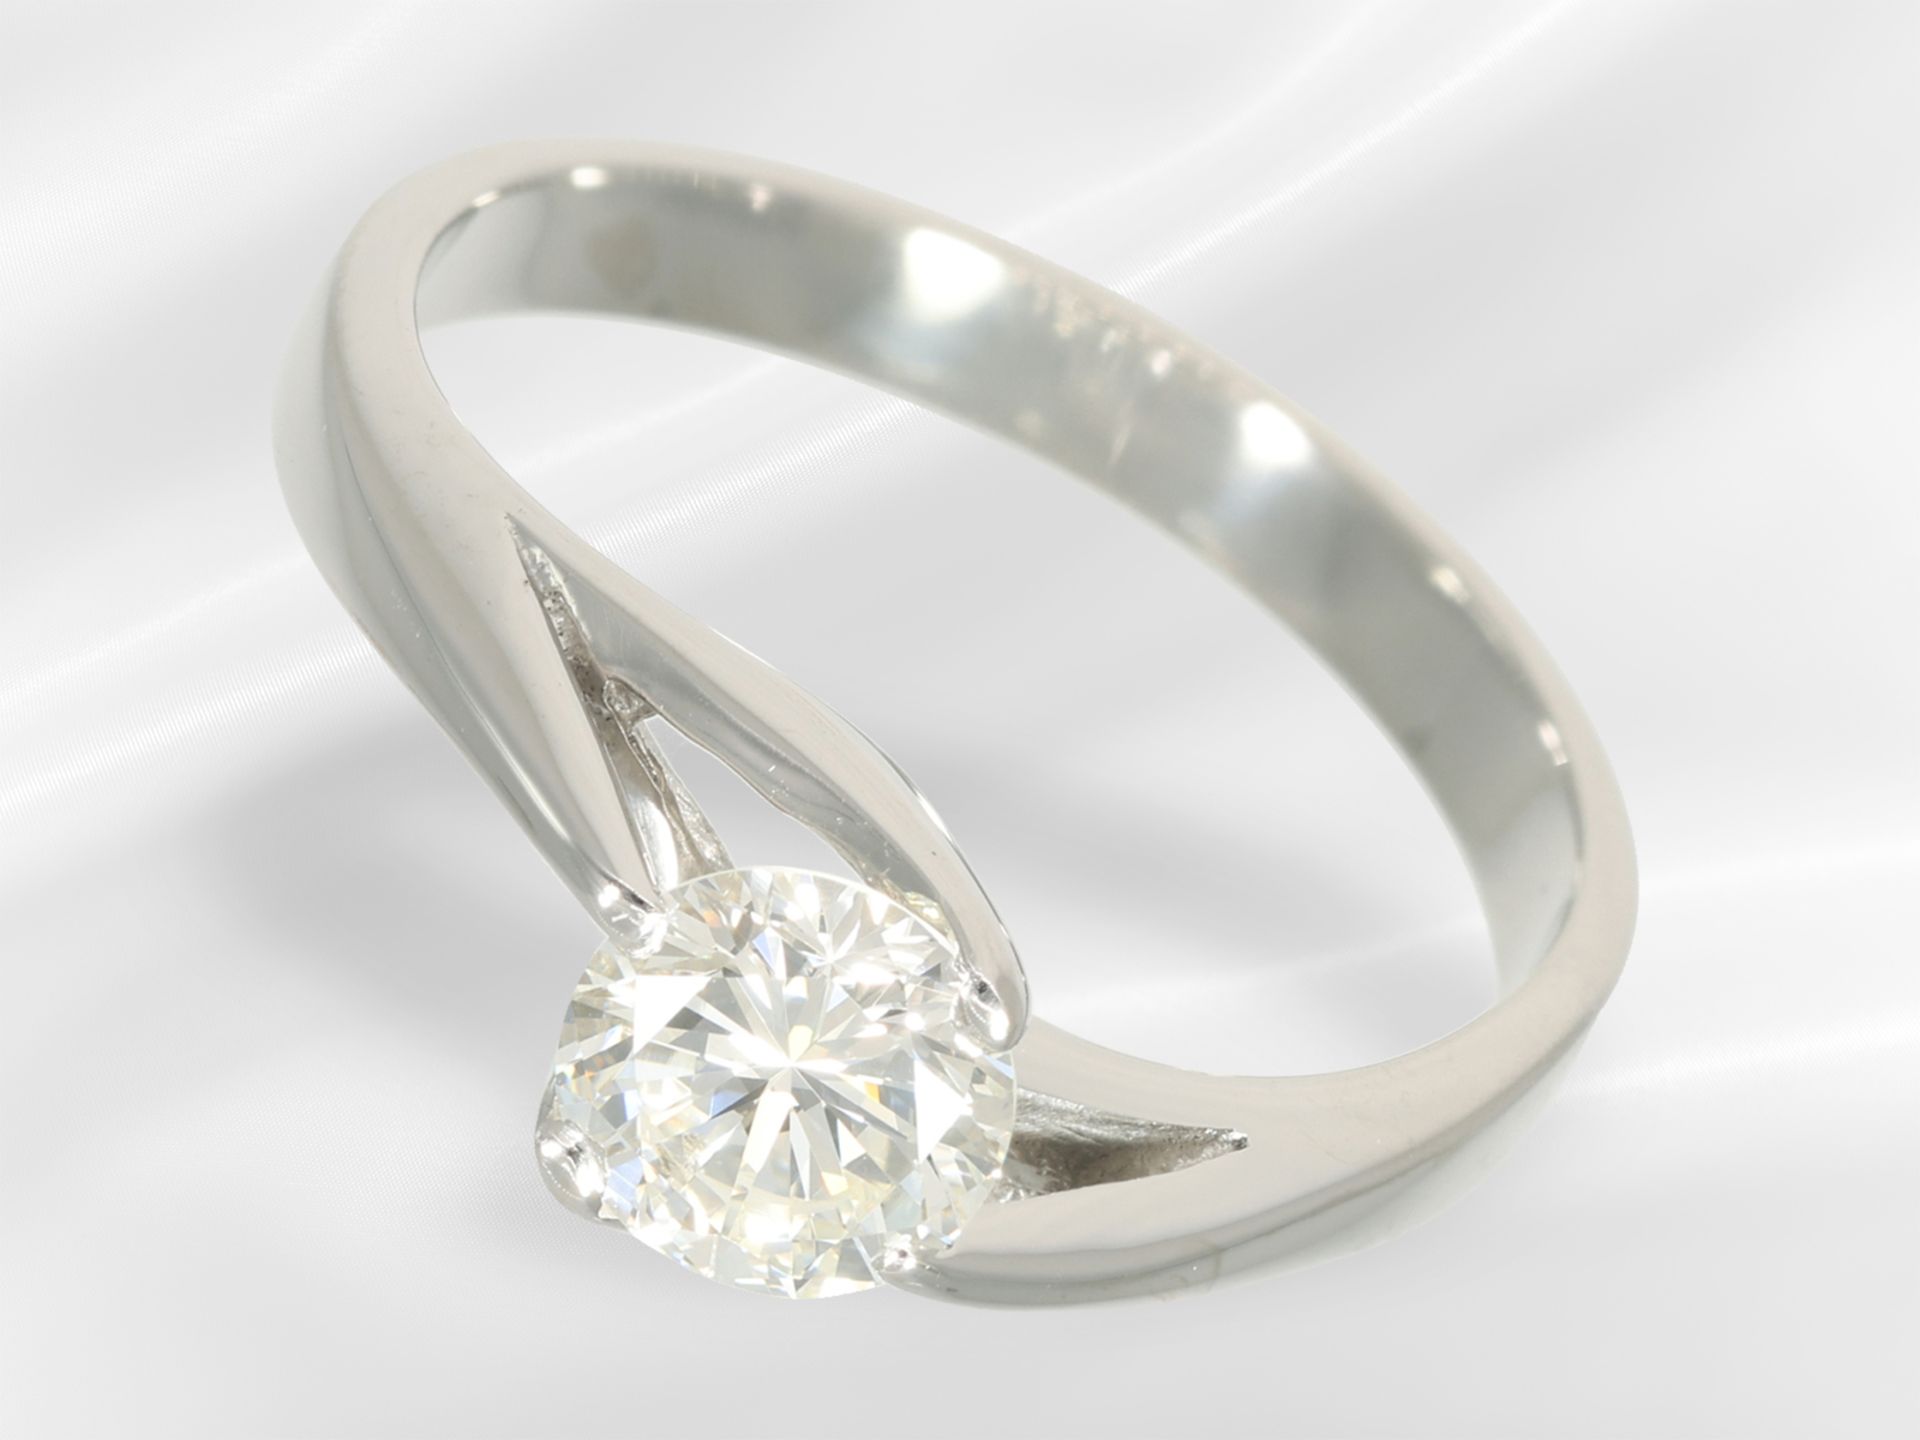 Ring: high-quality solitaire ring from Wempe, brilliant-cut diamond in top quality, flawless, 0.75ct